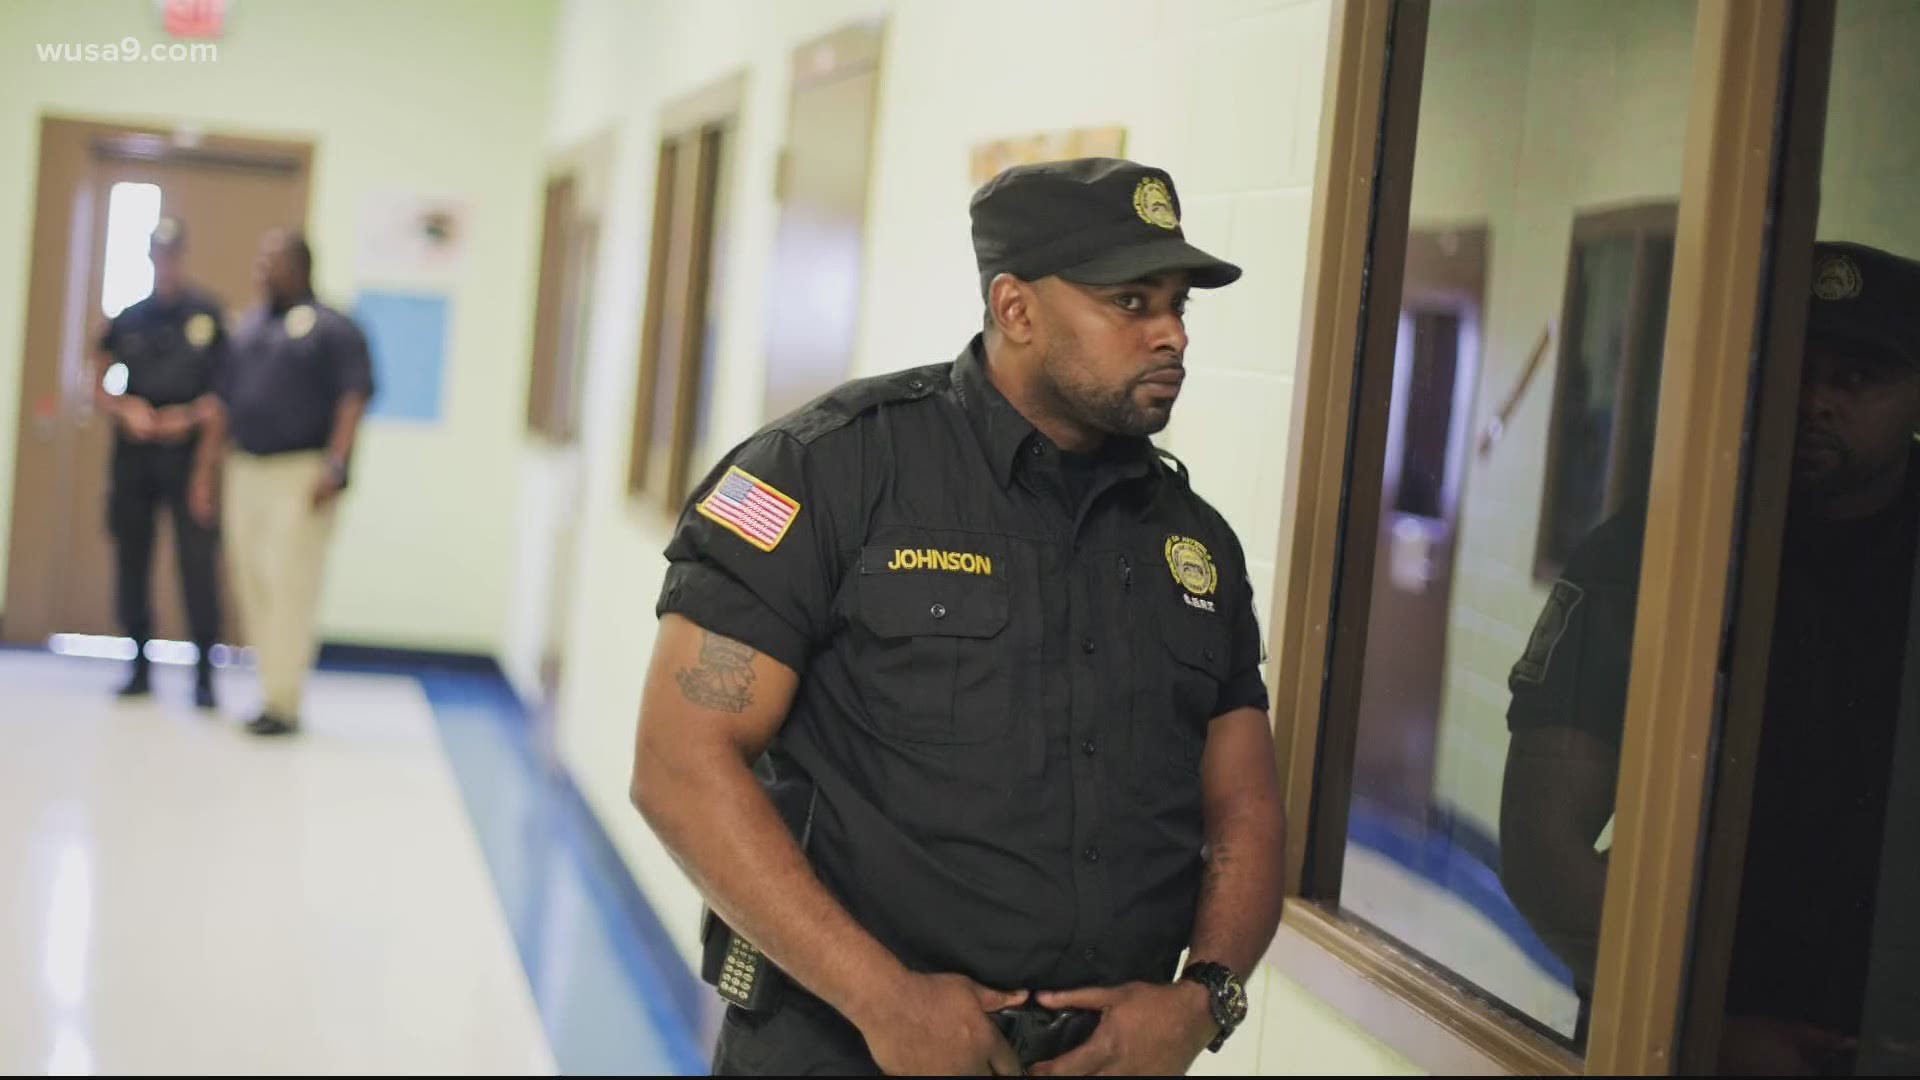 Since 2004, DC Police has managed the contract of security officers inside DC Public Schools, but DC Council passed an amendment to give DCPS hiring control.